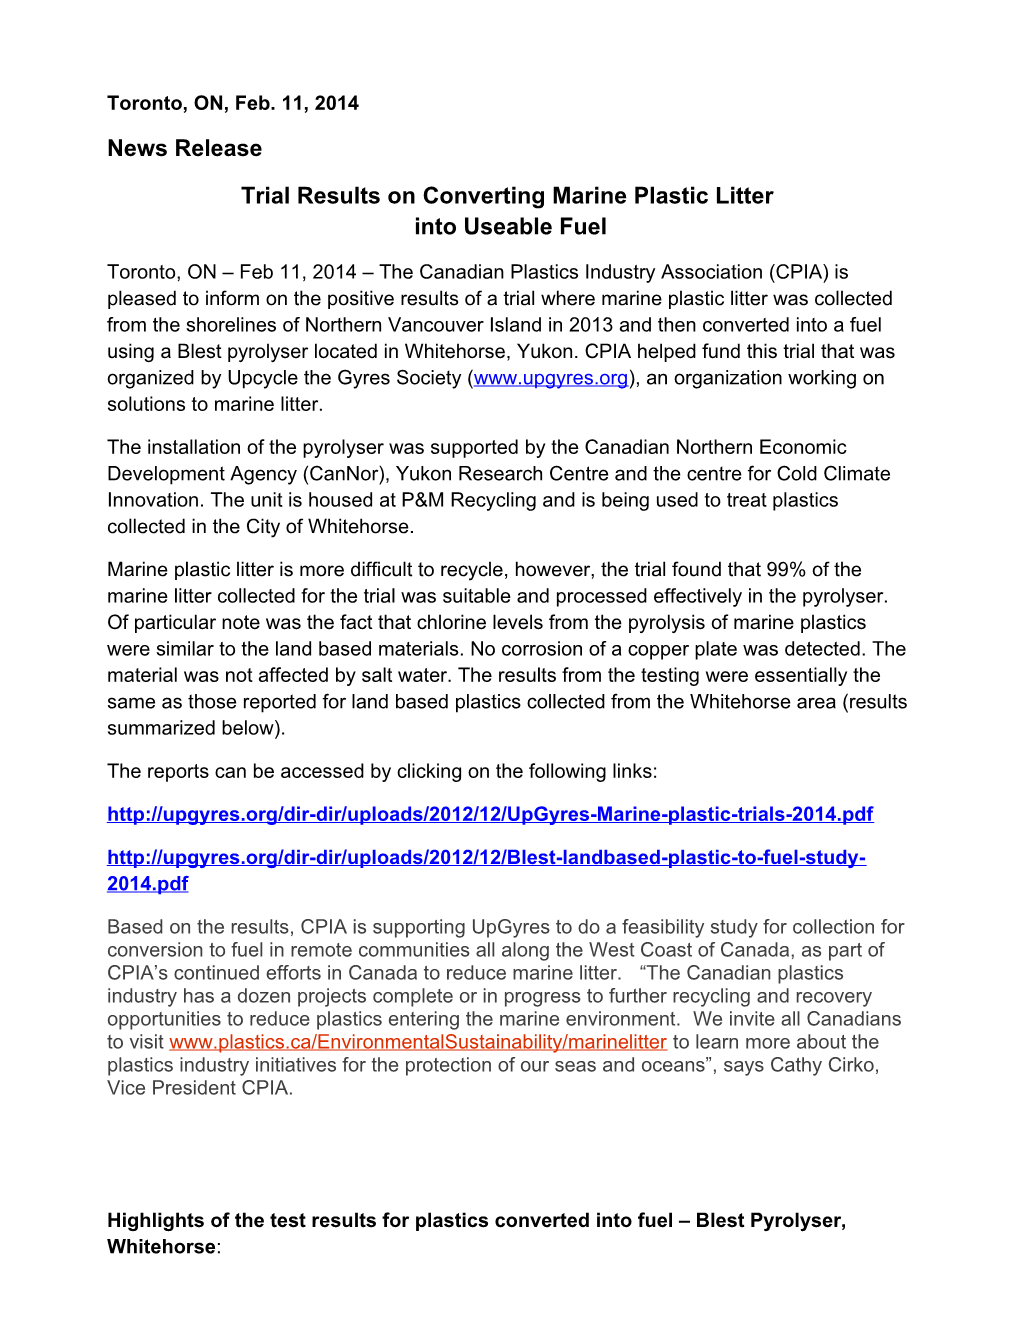 Trial Results on Converting Marine Plastic Litter Into Useable Fuel